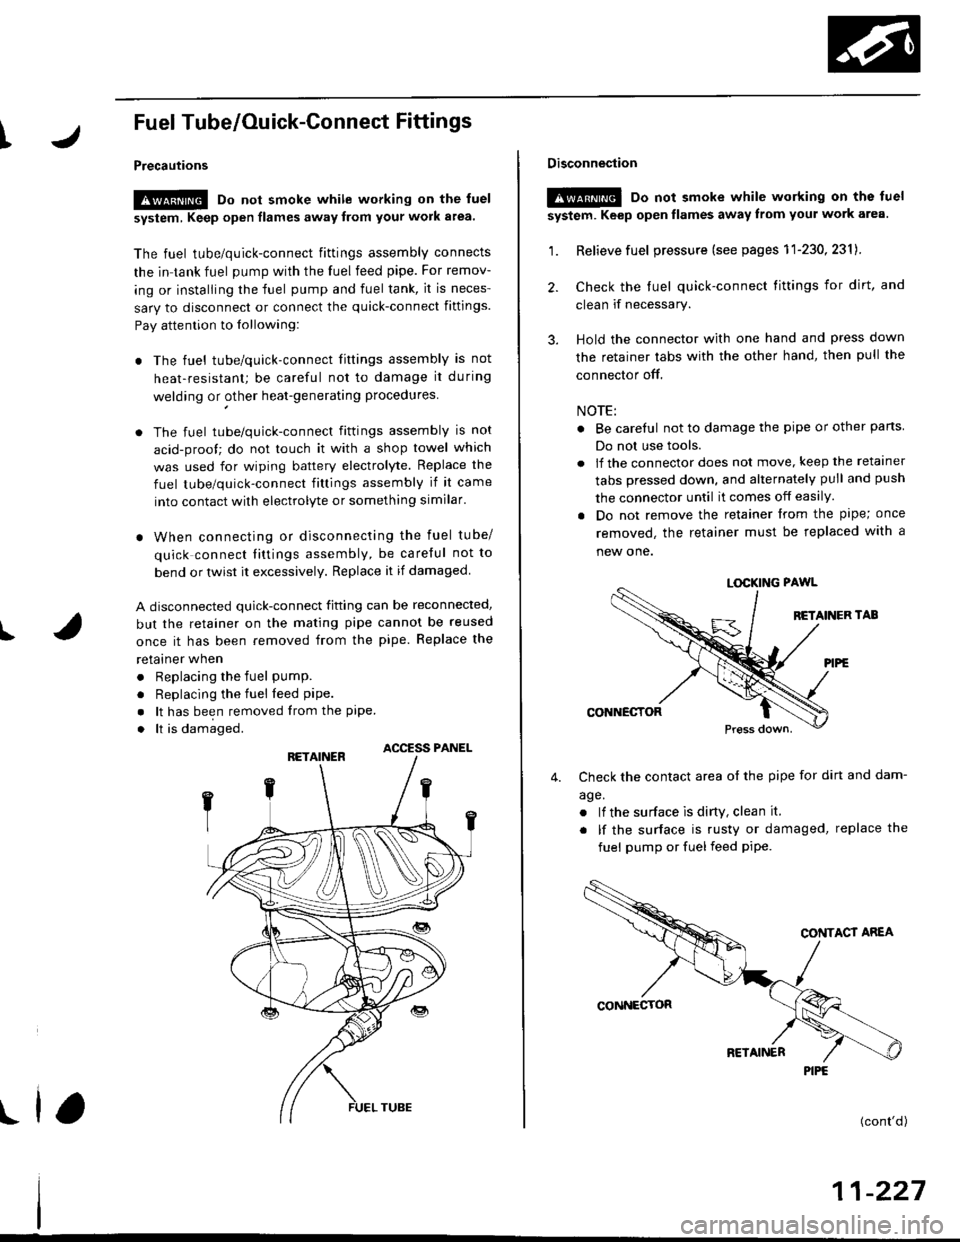 HONDA CIVIC 1999 6.G Owners Guide I
Fuel Tube/Ouick-Gonnect Fittings
Precautions
!@ Do not smoke while working on the fuel
system, Keep open flames away from your work a.ea
The fuel tube/quick-connect fittings assembly connects
the i